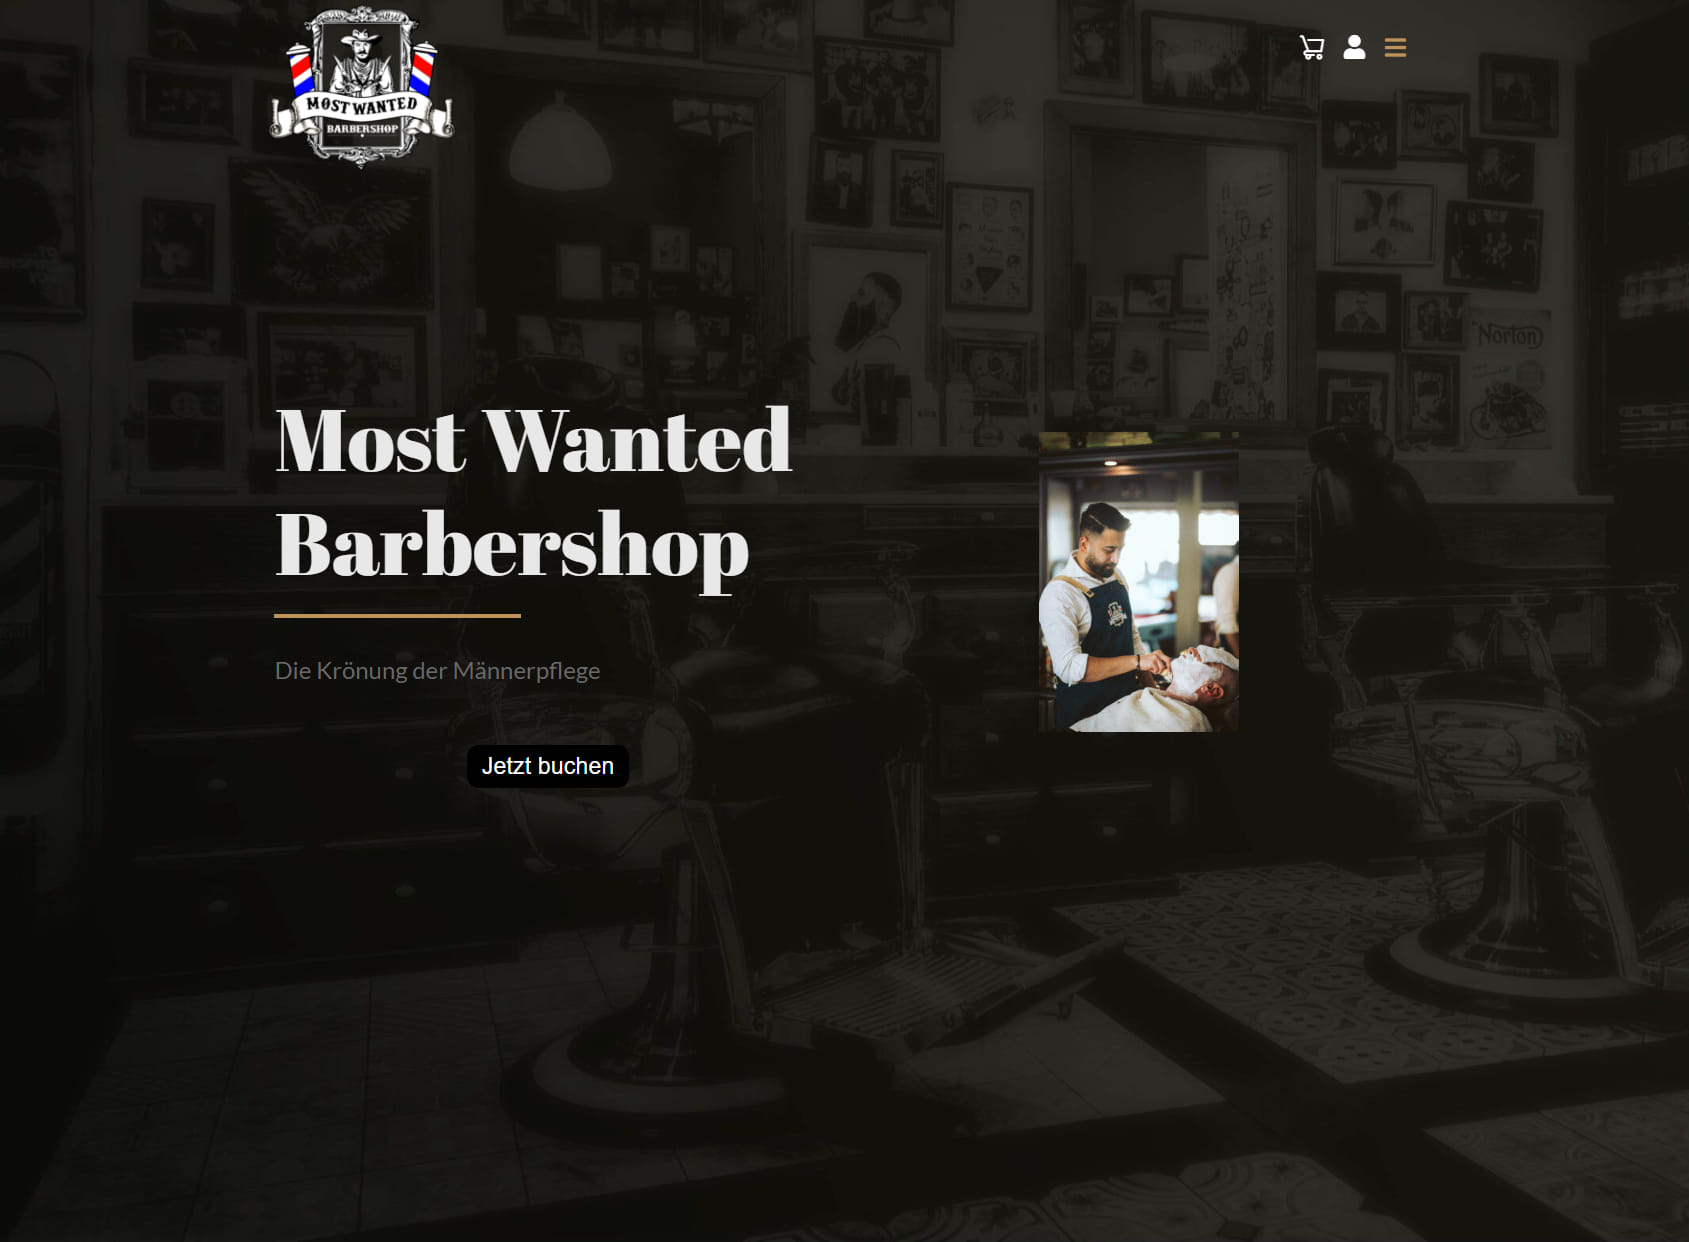 Most Wanted Barbershop